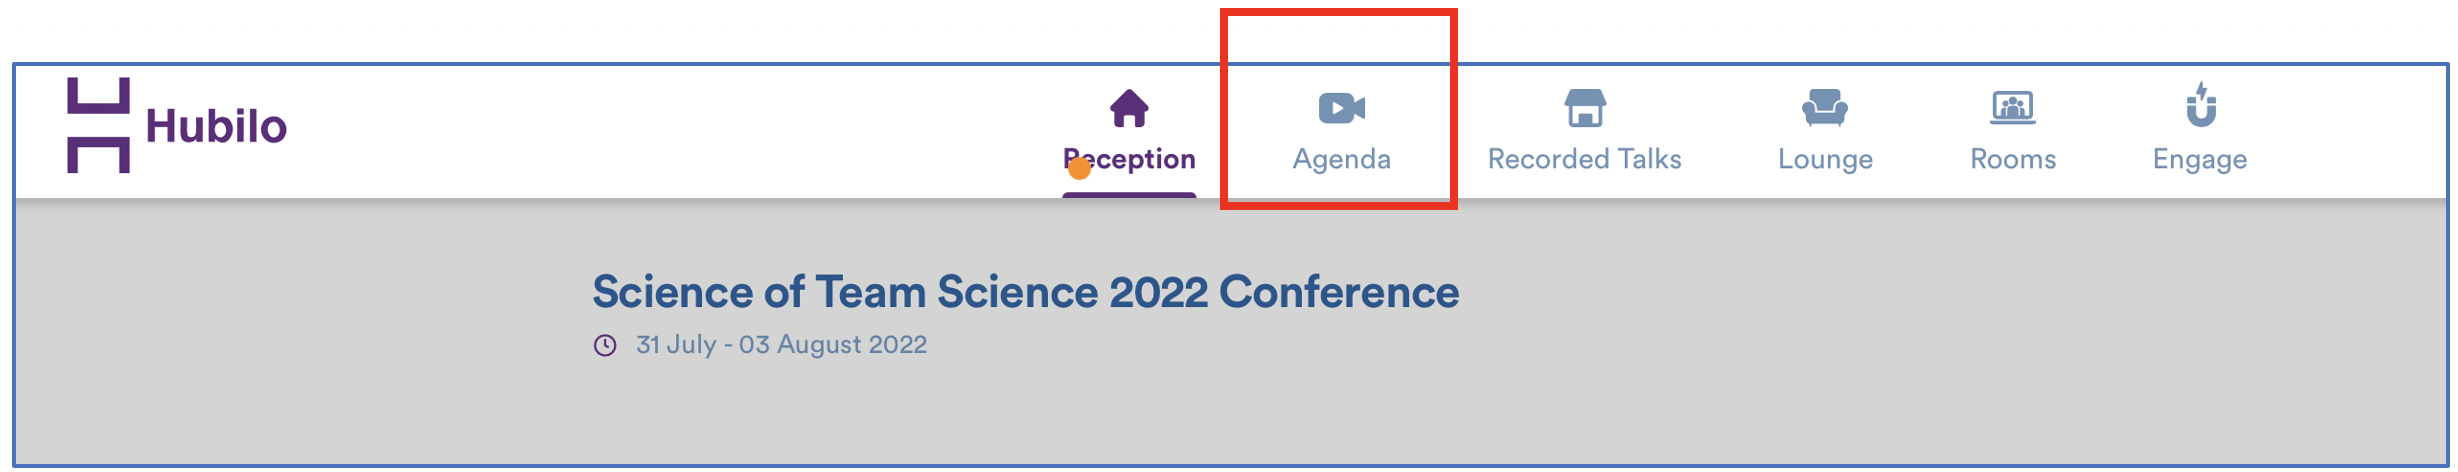 Cropped screenshot of webpage header in Hubilo event. At the top are icons labeled "Reception", "Agenda", "Recorded Talks", "Lounge", "Rooms", and "Engage". The Agenda icon is outlined with a red box to emphasize it. Below the icons in the main content area of the webpage is the following text: "Science of Team Science 2022 Conference 31 July - 03 August 2022"